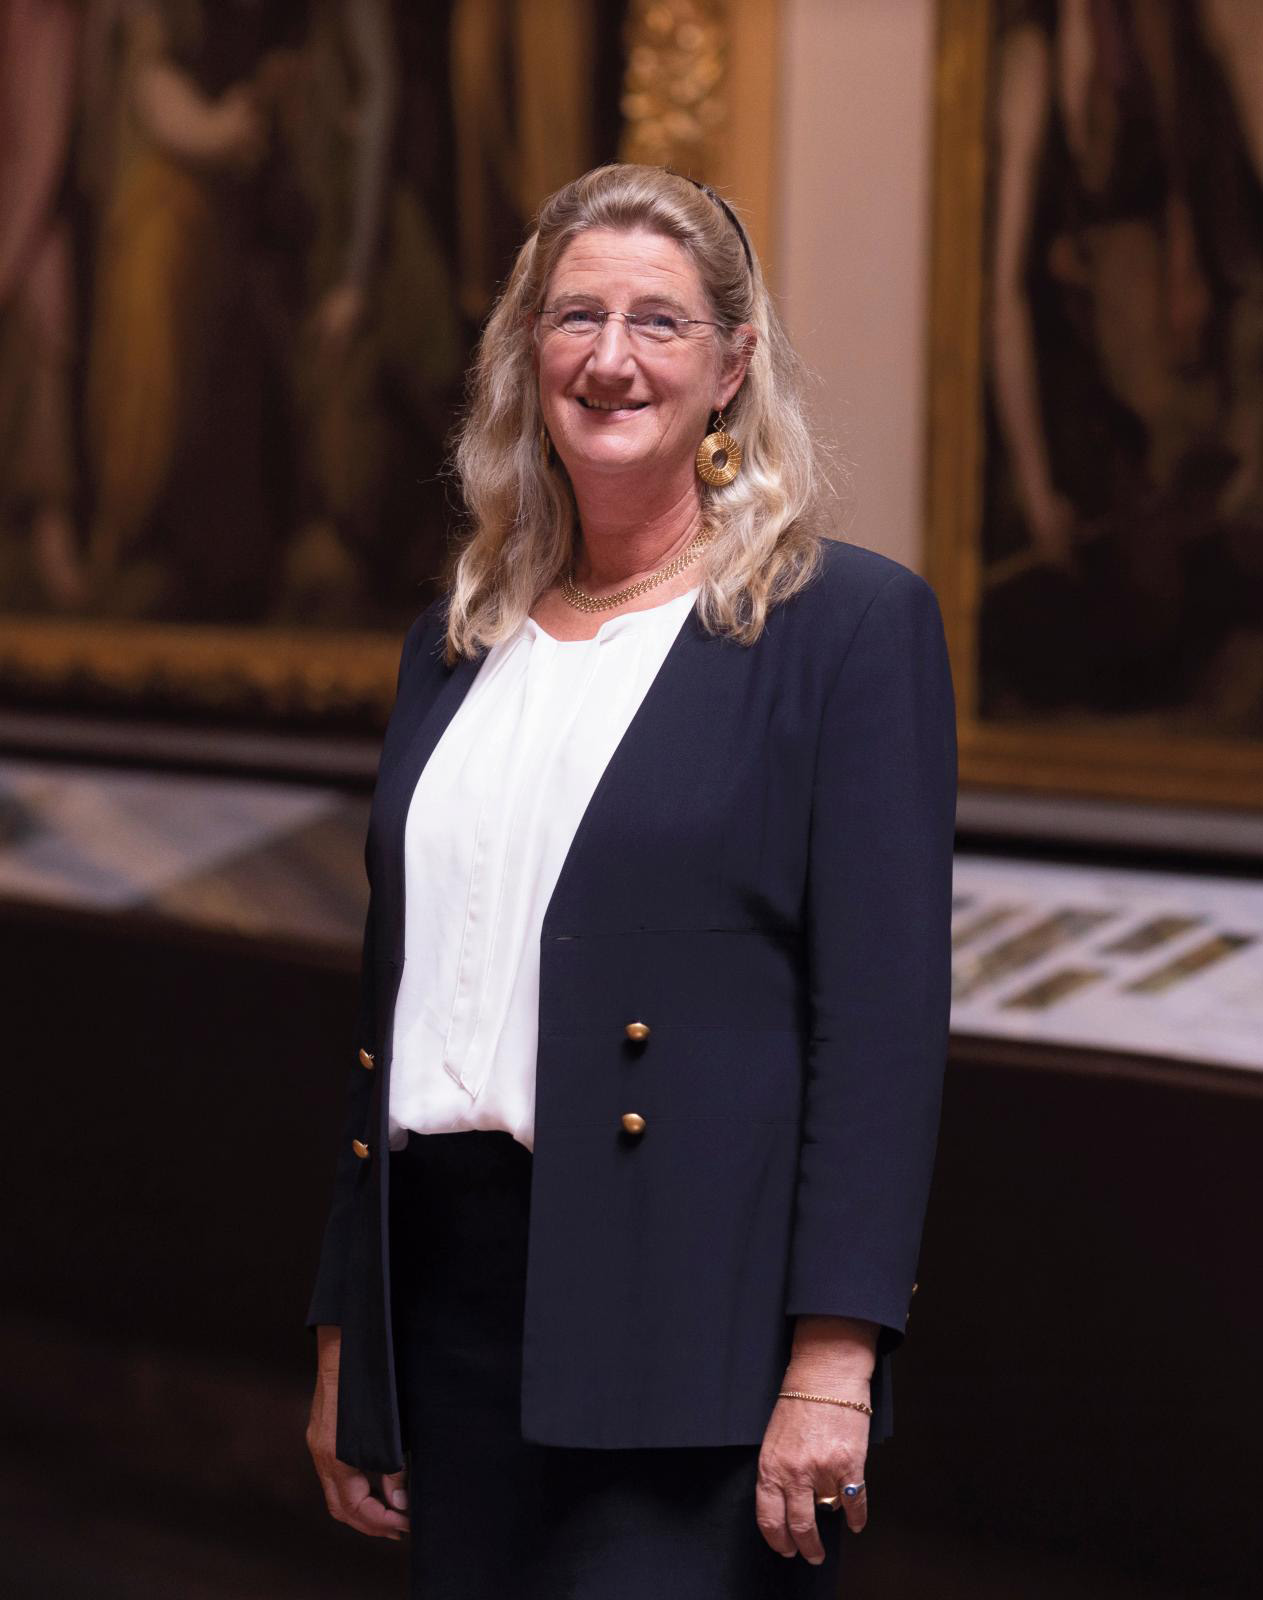 Cecilie Hollberg, Director of the Galleria dell’Accademia in Florence